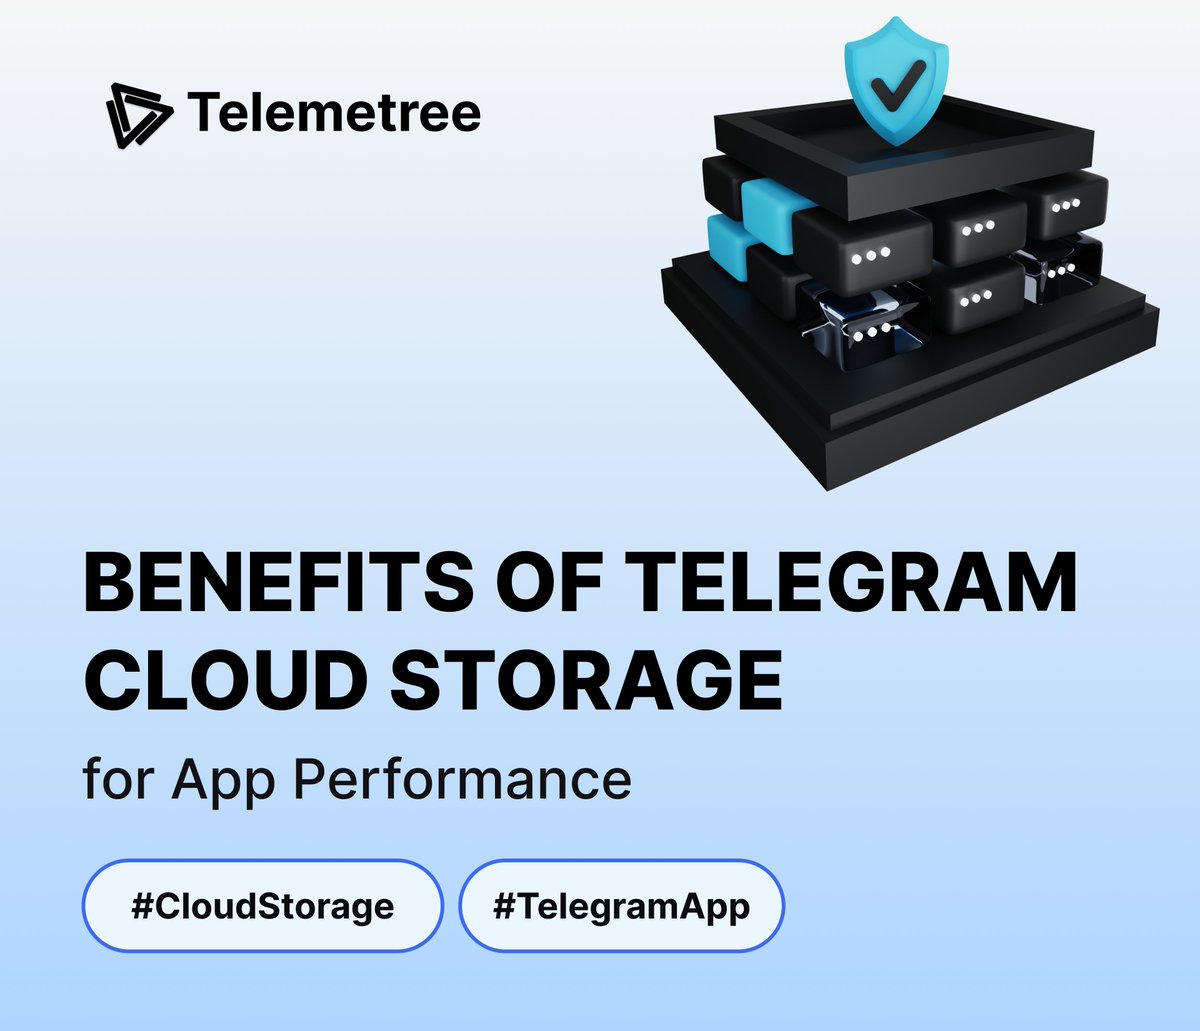 Are you developing a Telegram Mini App? Utilizing Telegram's cloud storage can enhance your app by ensuring rapid data synchronization, reducing costs, and boosting data security.

#CloudStorage #TelegramApp